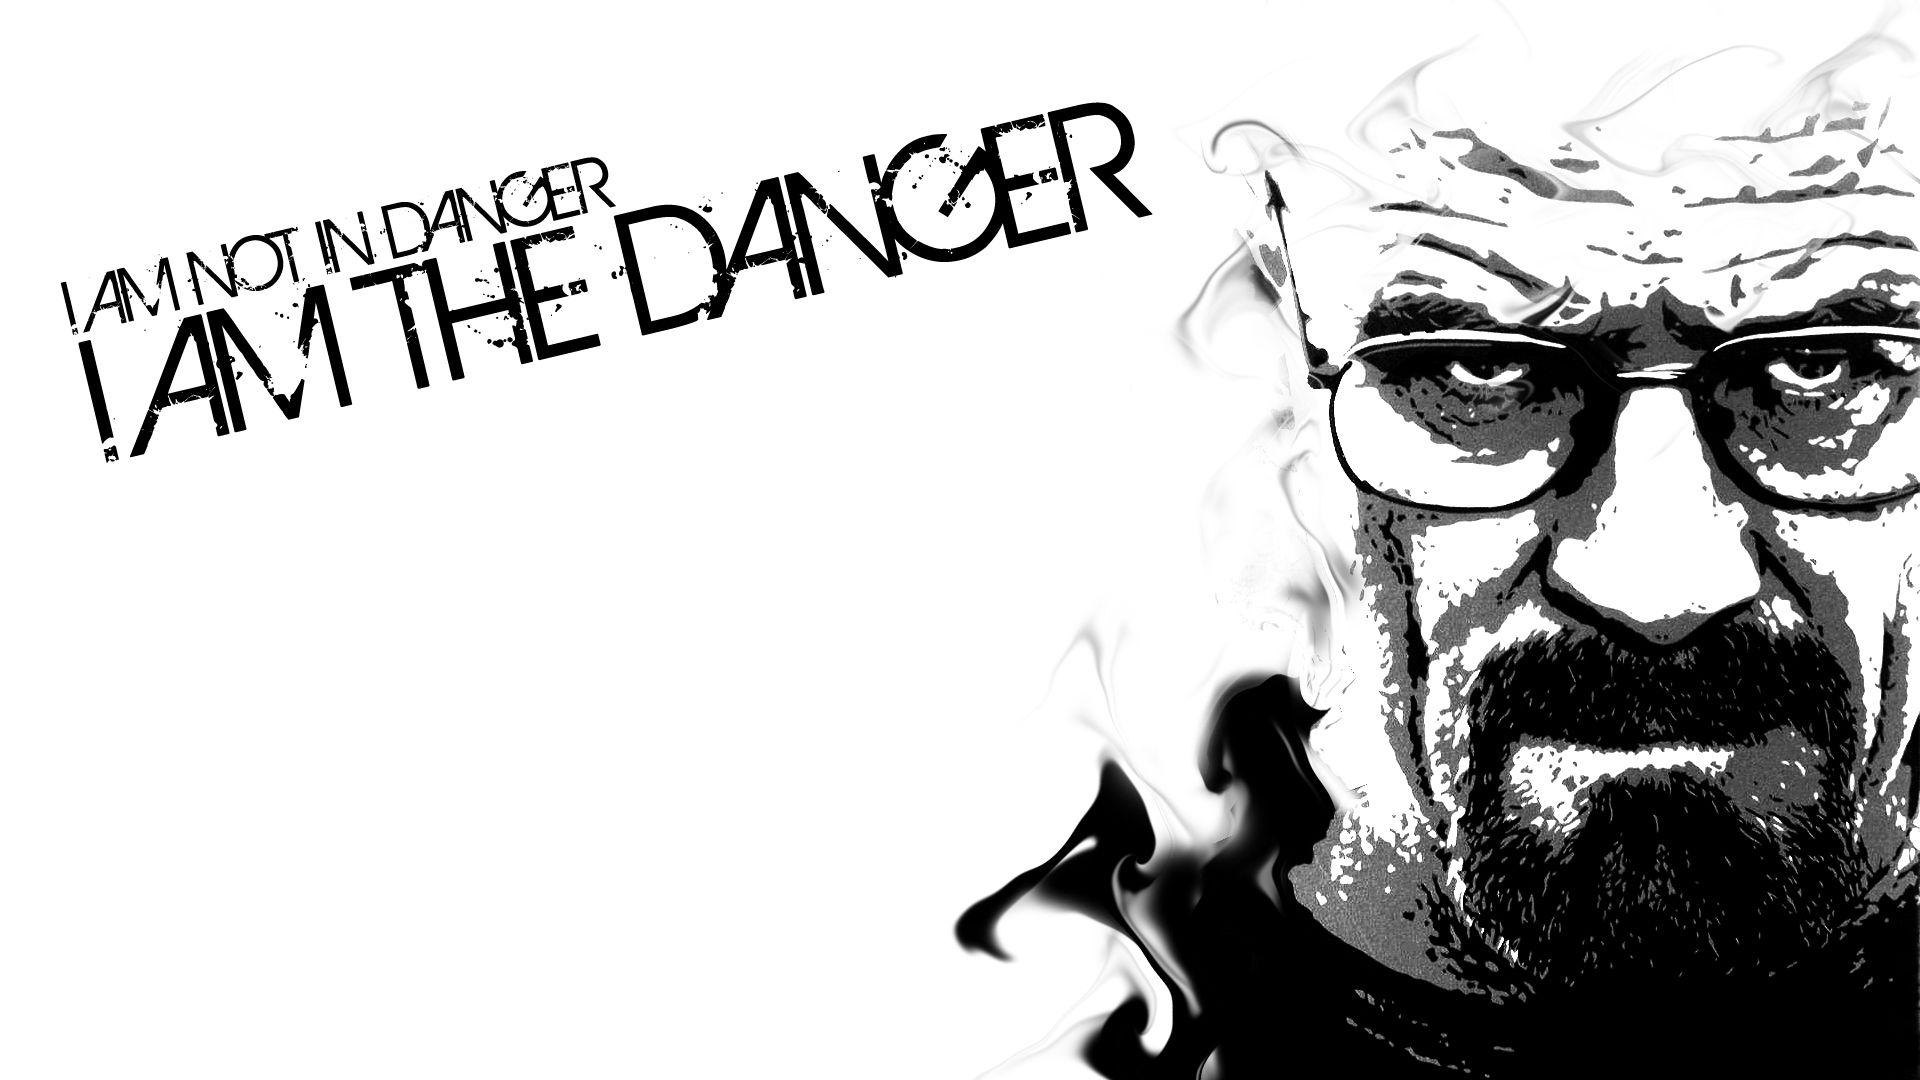 Breaking Bad HD Wallpaper, Picture, Image